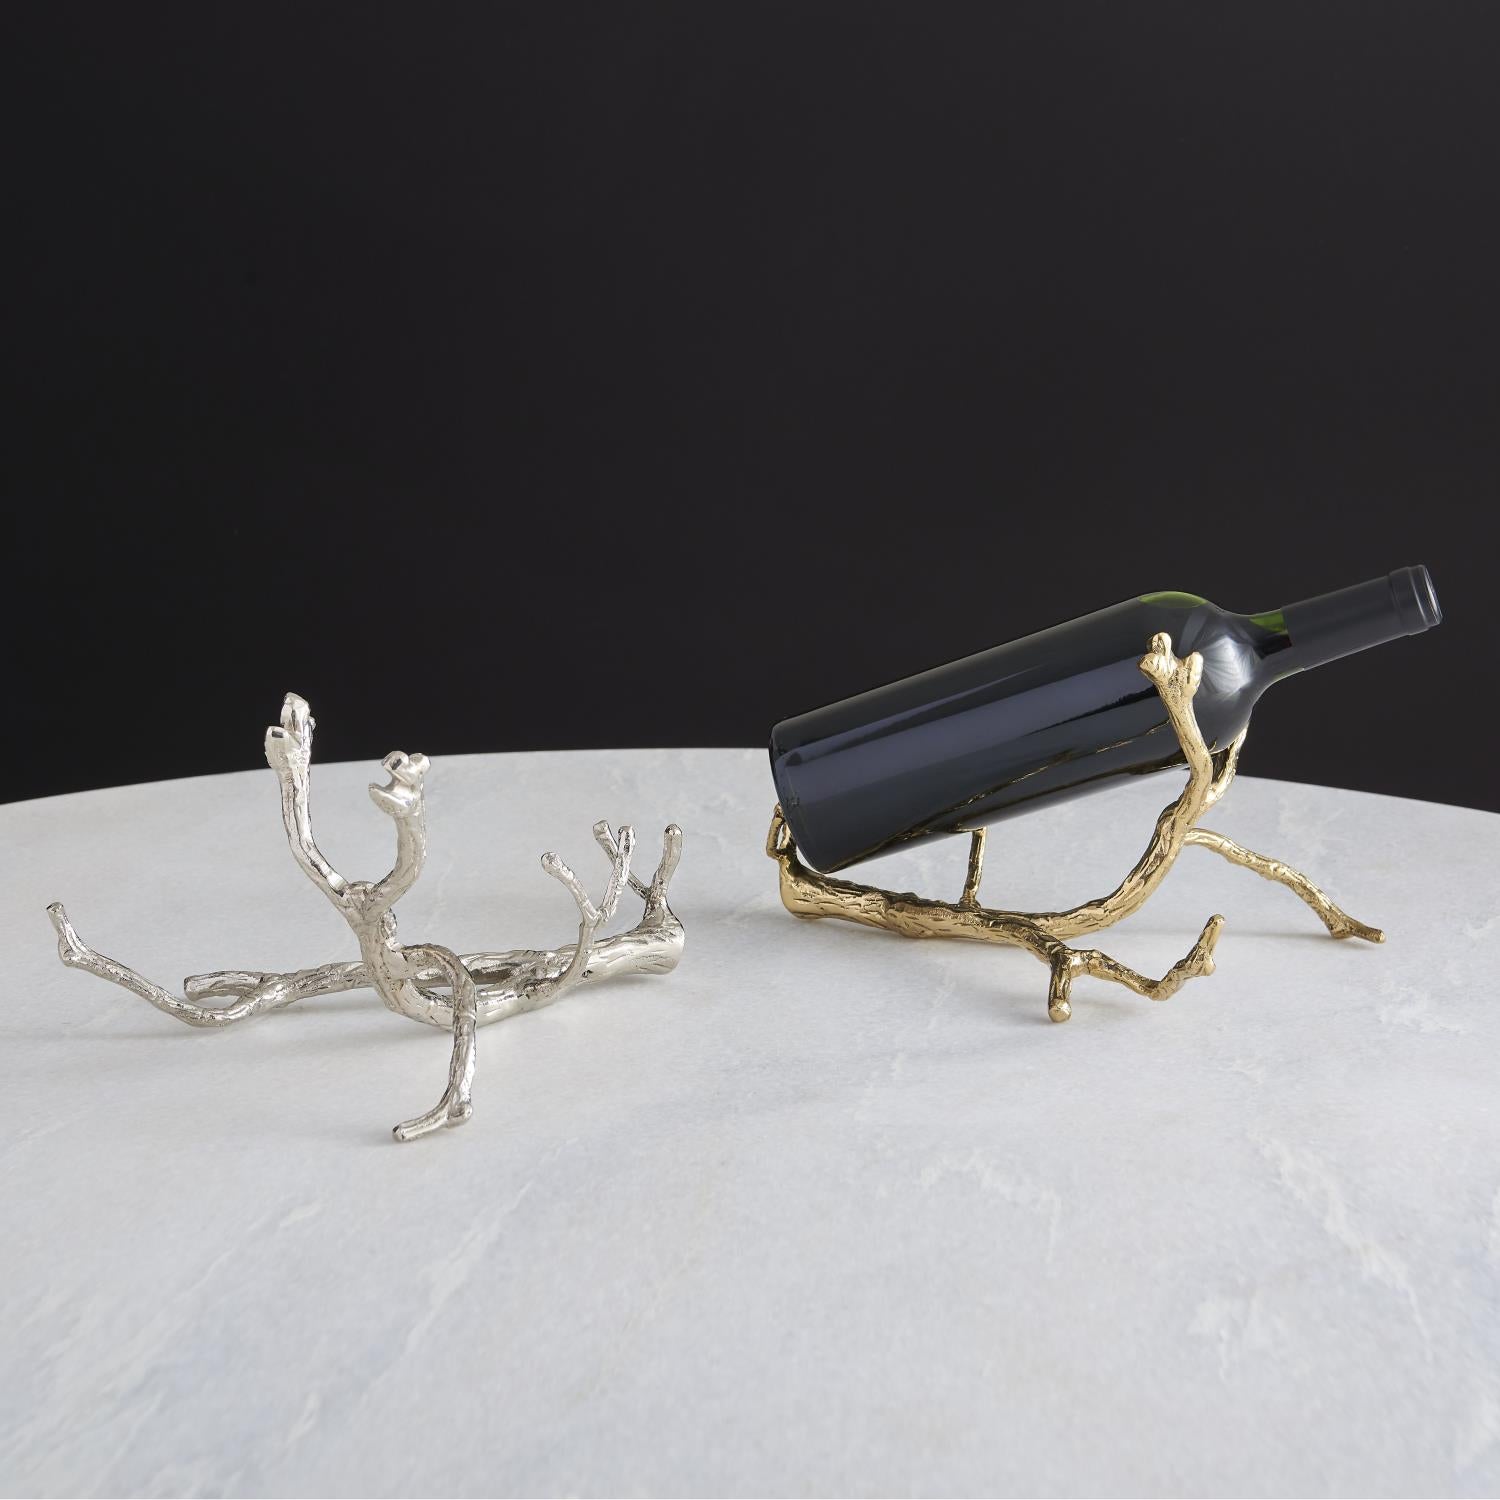 Twig Wine Bottle Holder-Global Views-Sculptures & Objects-Artistic Elements